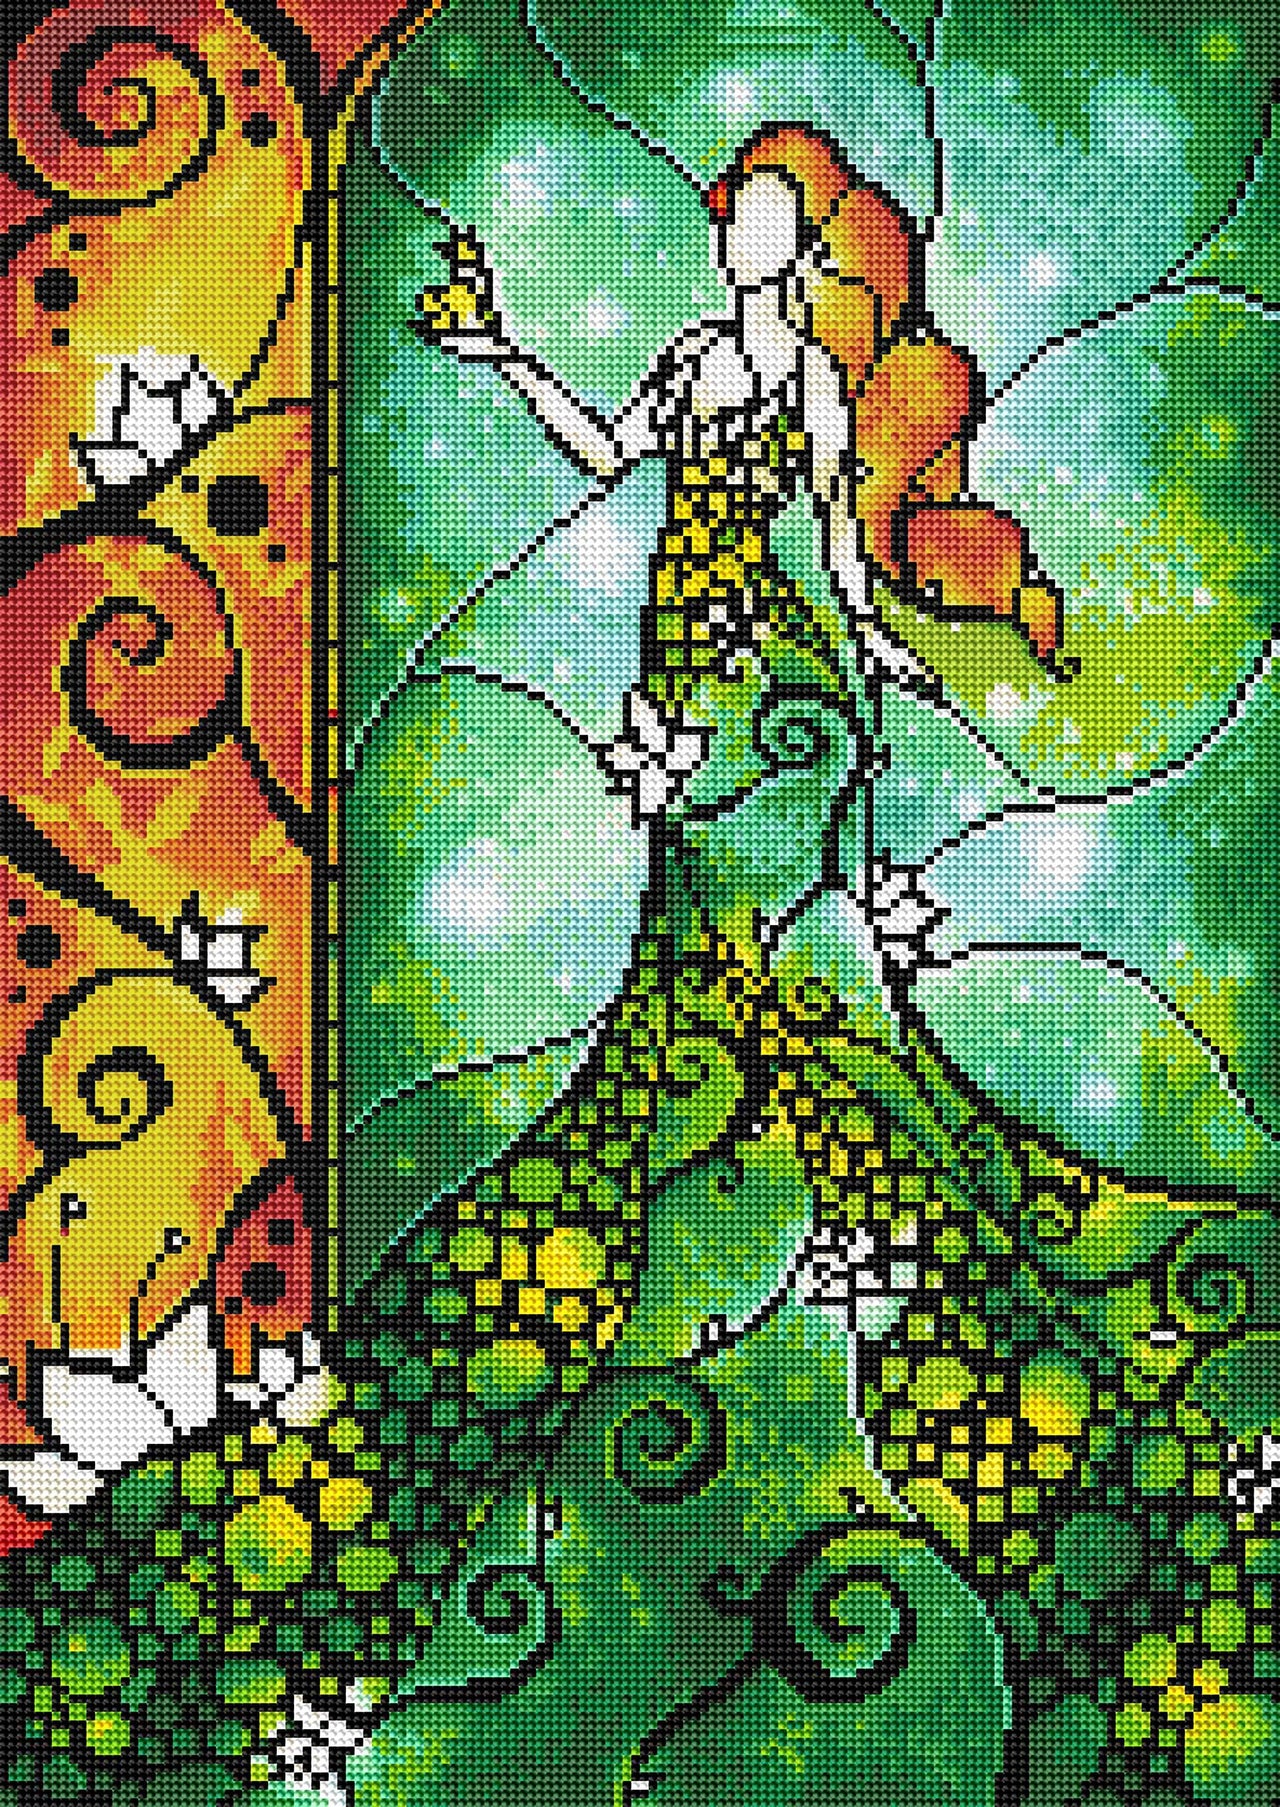 Diamond Painting The Princess And The Frog 16.5" x 23.2" (42cm x 59cm) / Round With 30 Colors Including 1 AB / 30392